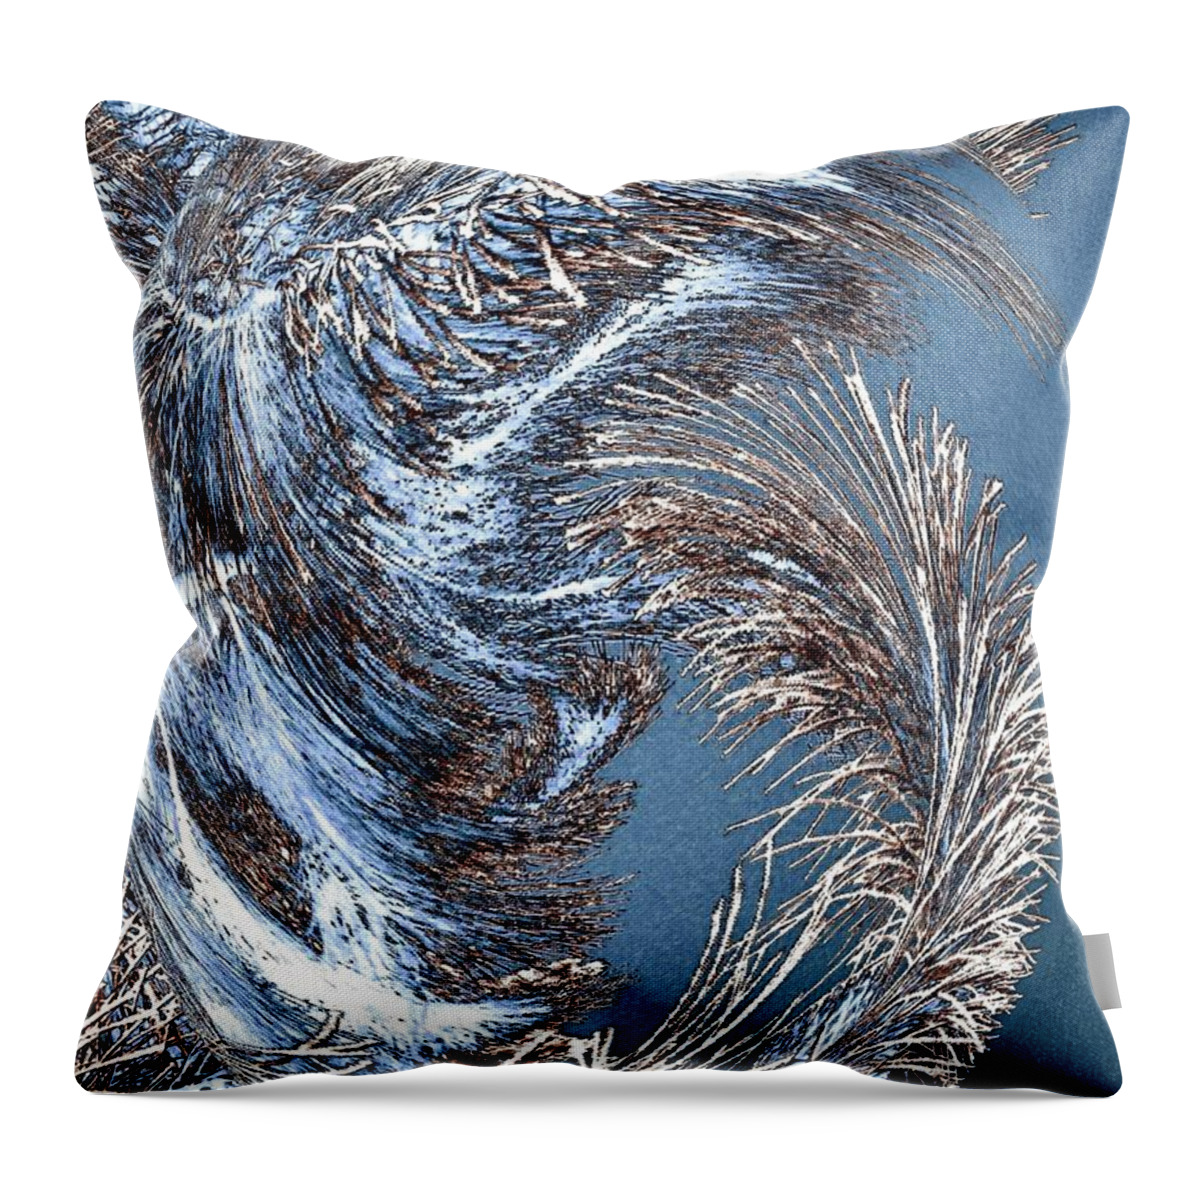 Wintry Pine Needles Throw Pillow featuring the digital art Wintry Pine Needles by Will Borden